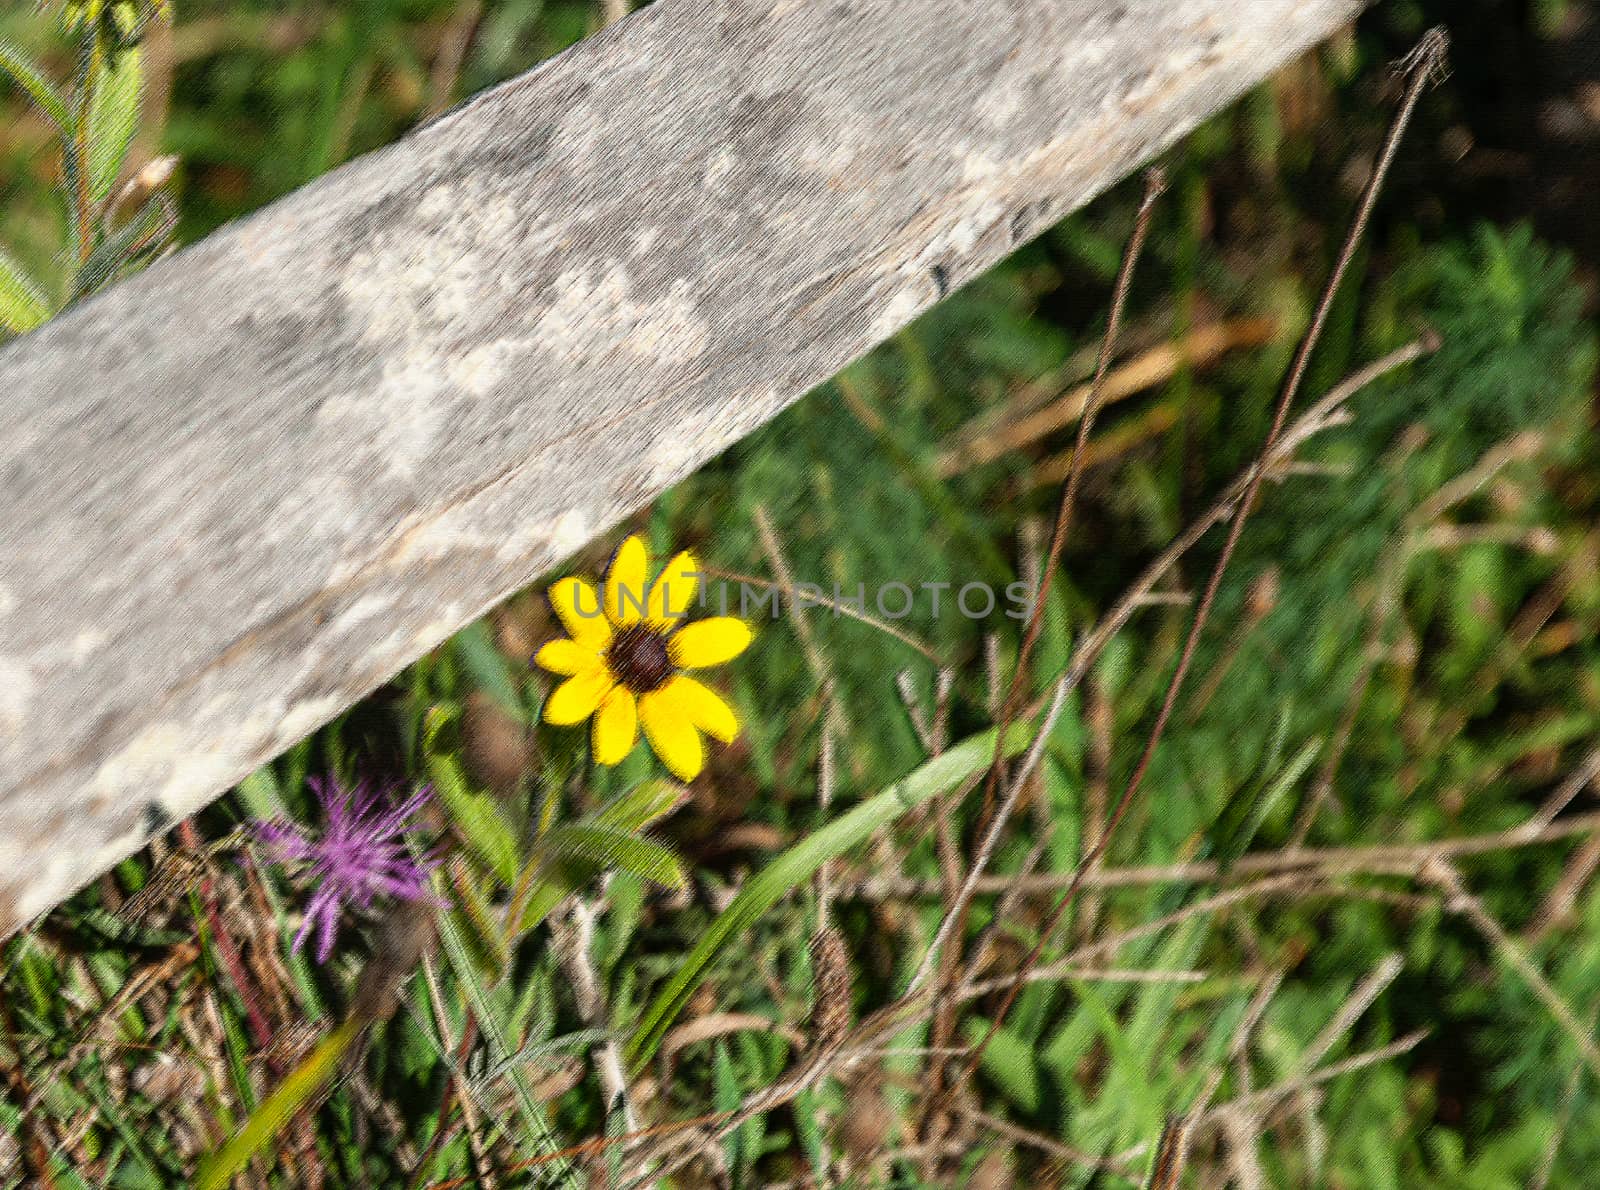 Bright yellow flower in field under rustic wooden fence rail by brians101